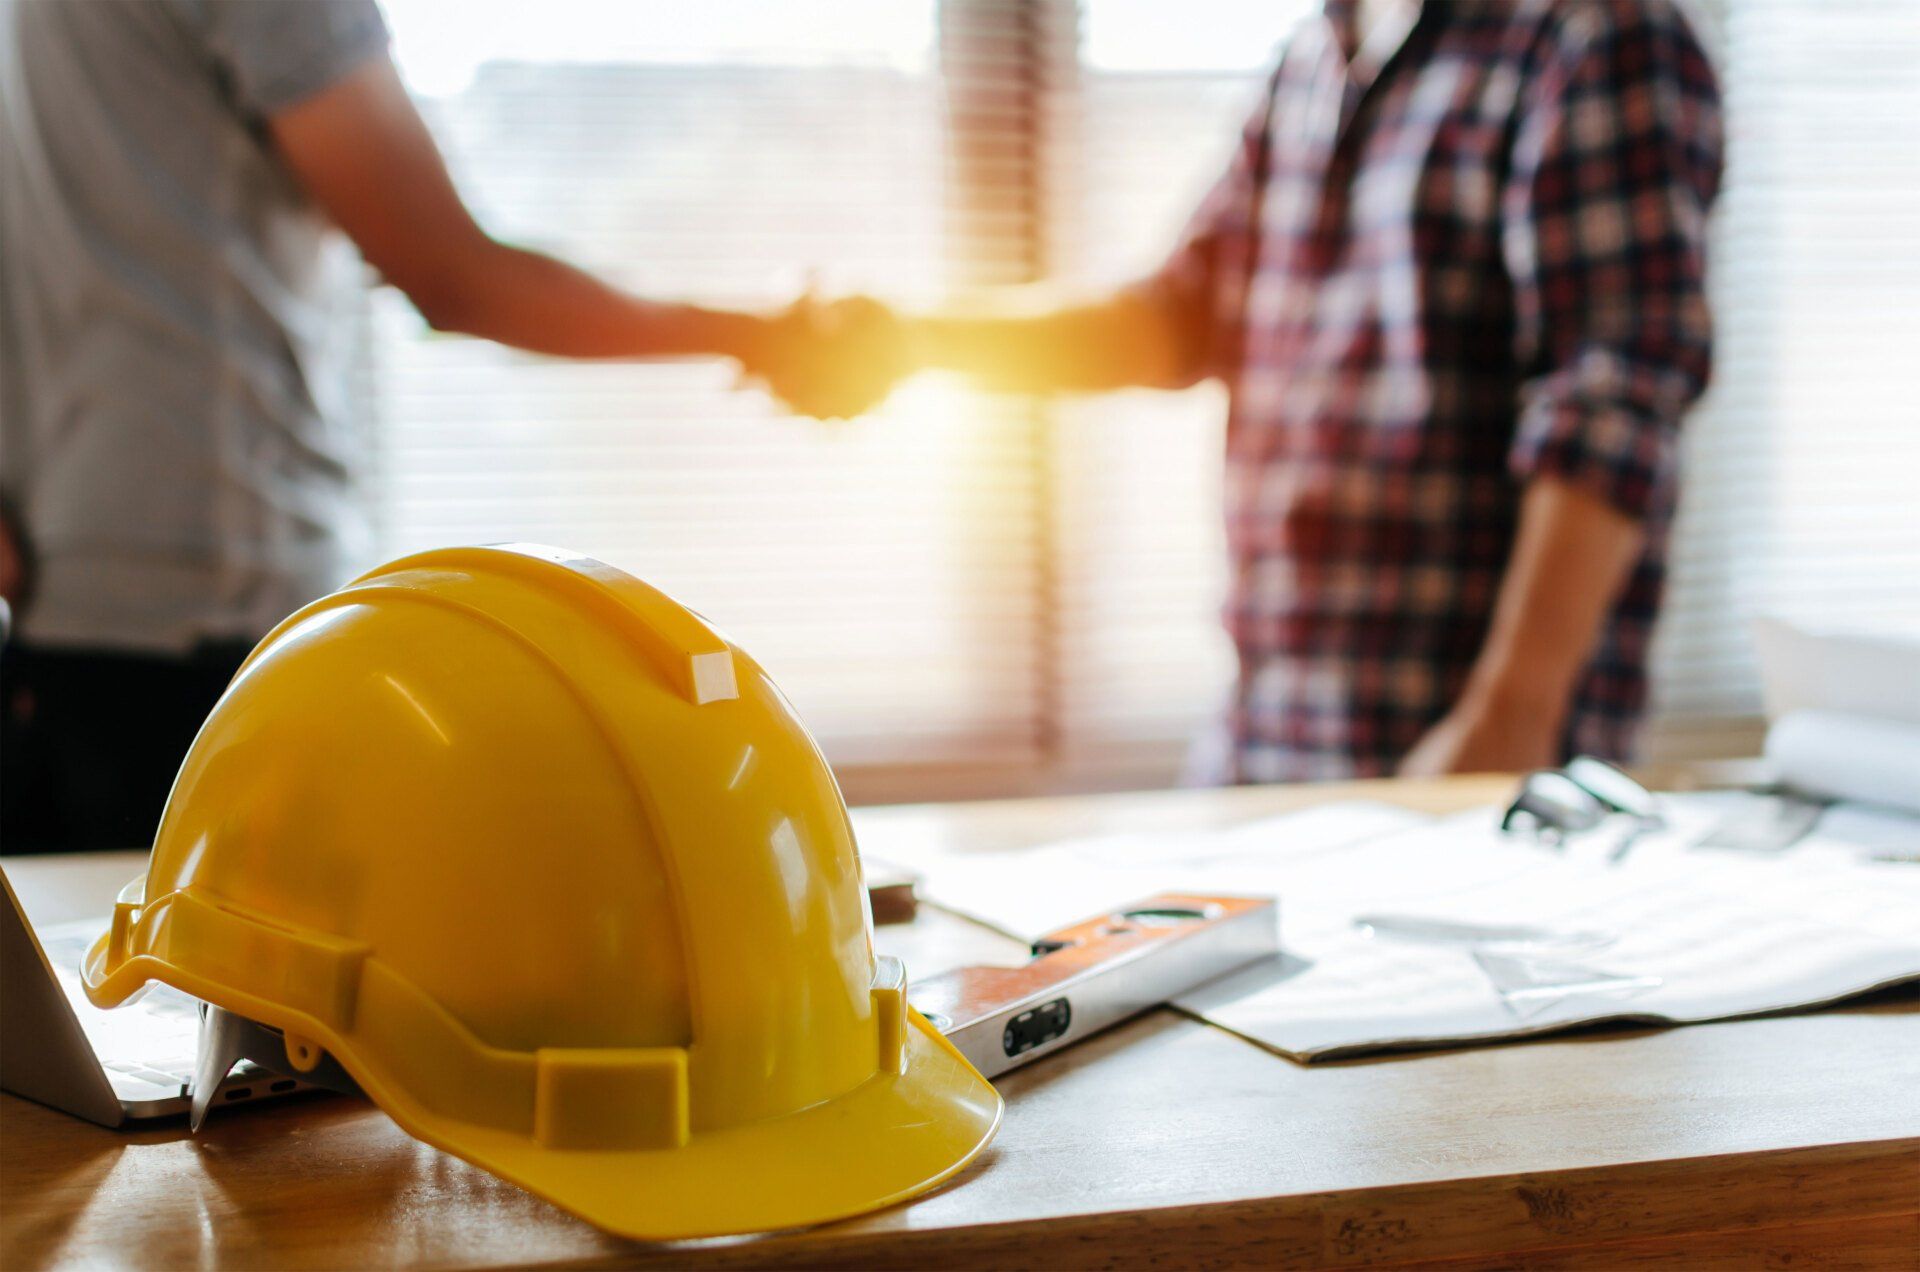 Contractor shaking hands with client